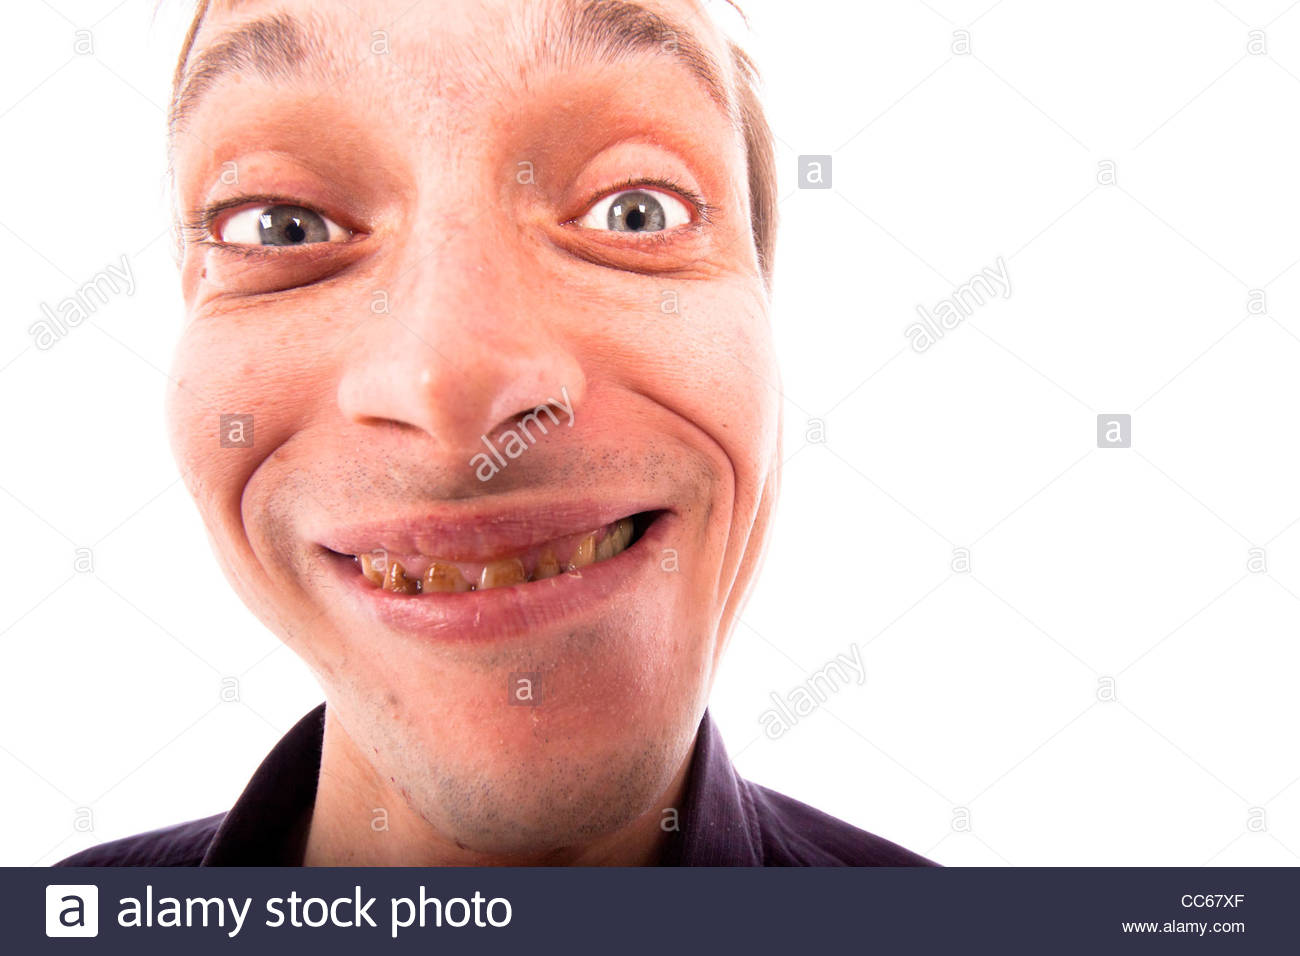 Detail Of Ugly Man Face Isolated On White Background Stock Photo